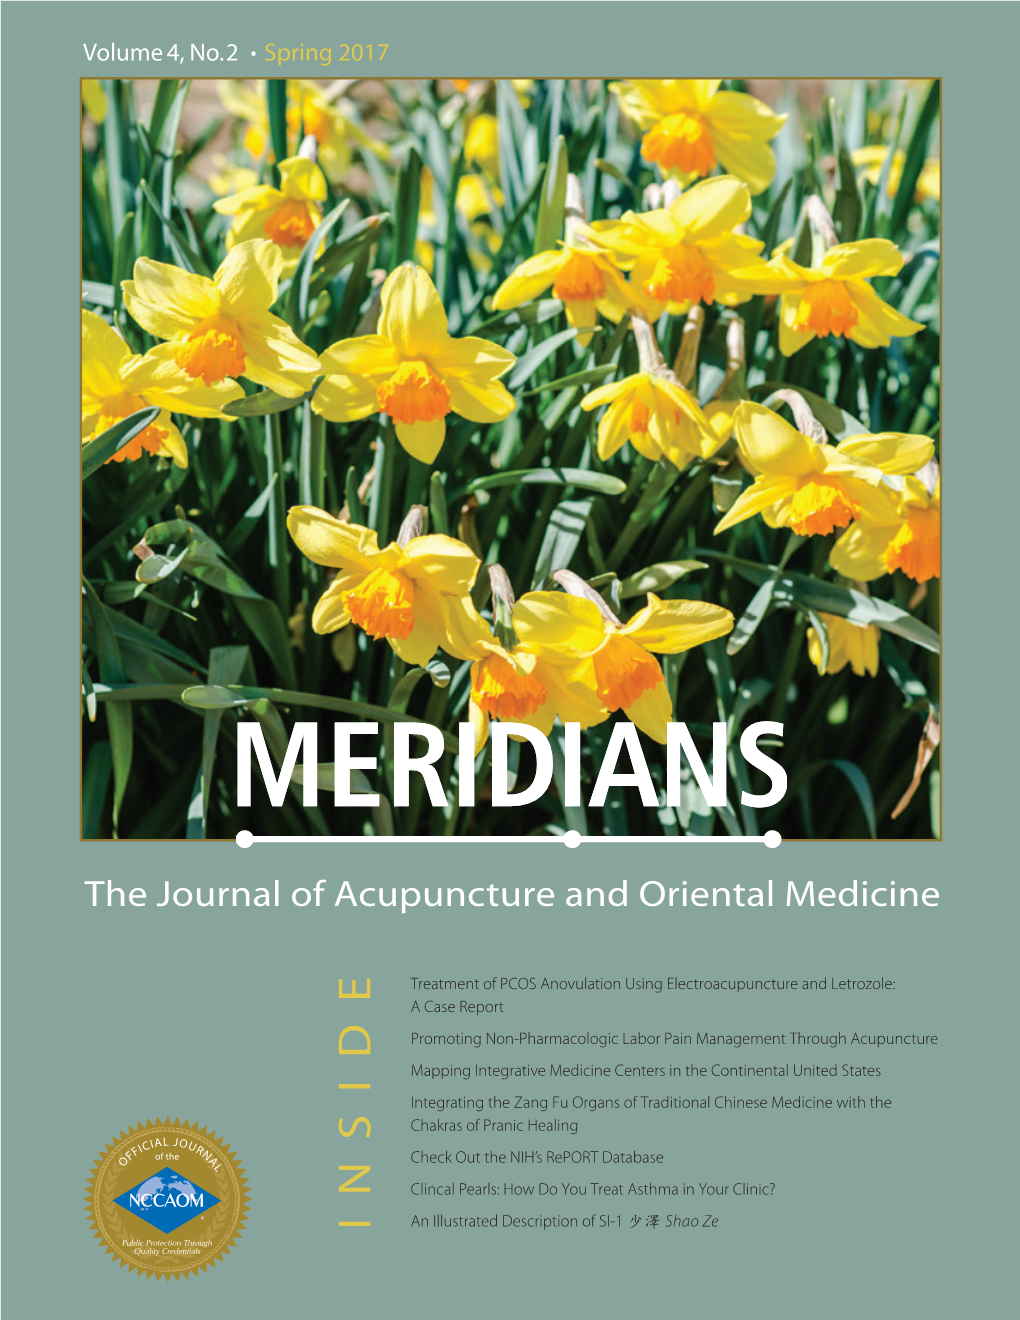 Journal of Acupuncture and Oriental Medicine